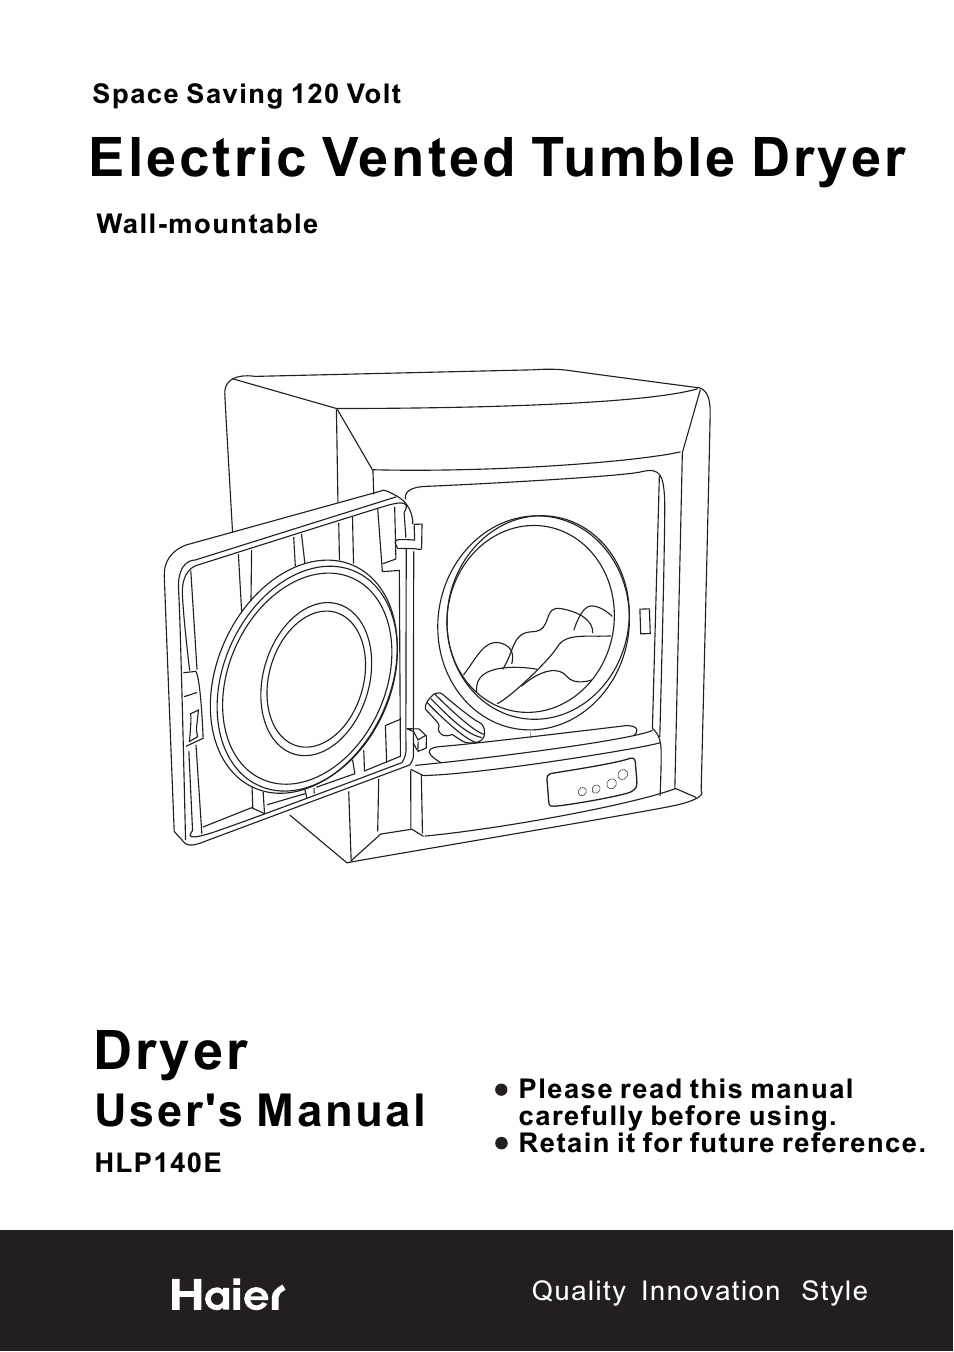 Space Saving 120 Volt Electric Vented Tumble Dryer HLP140E